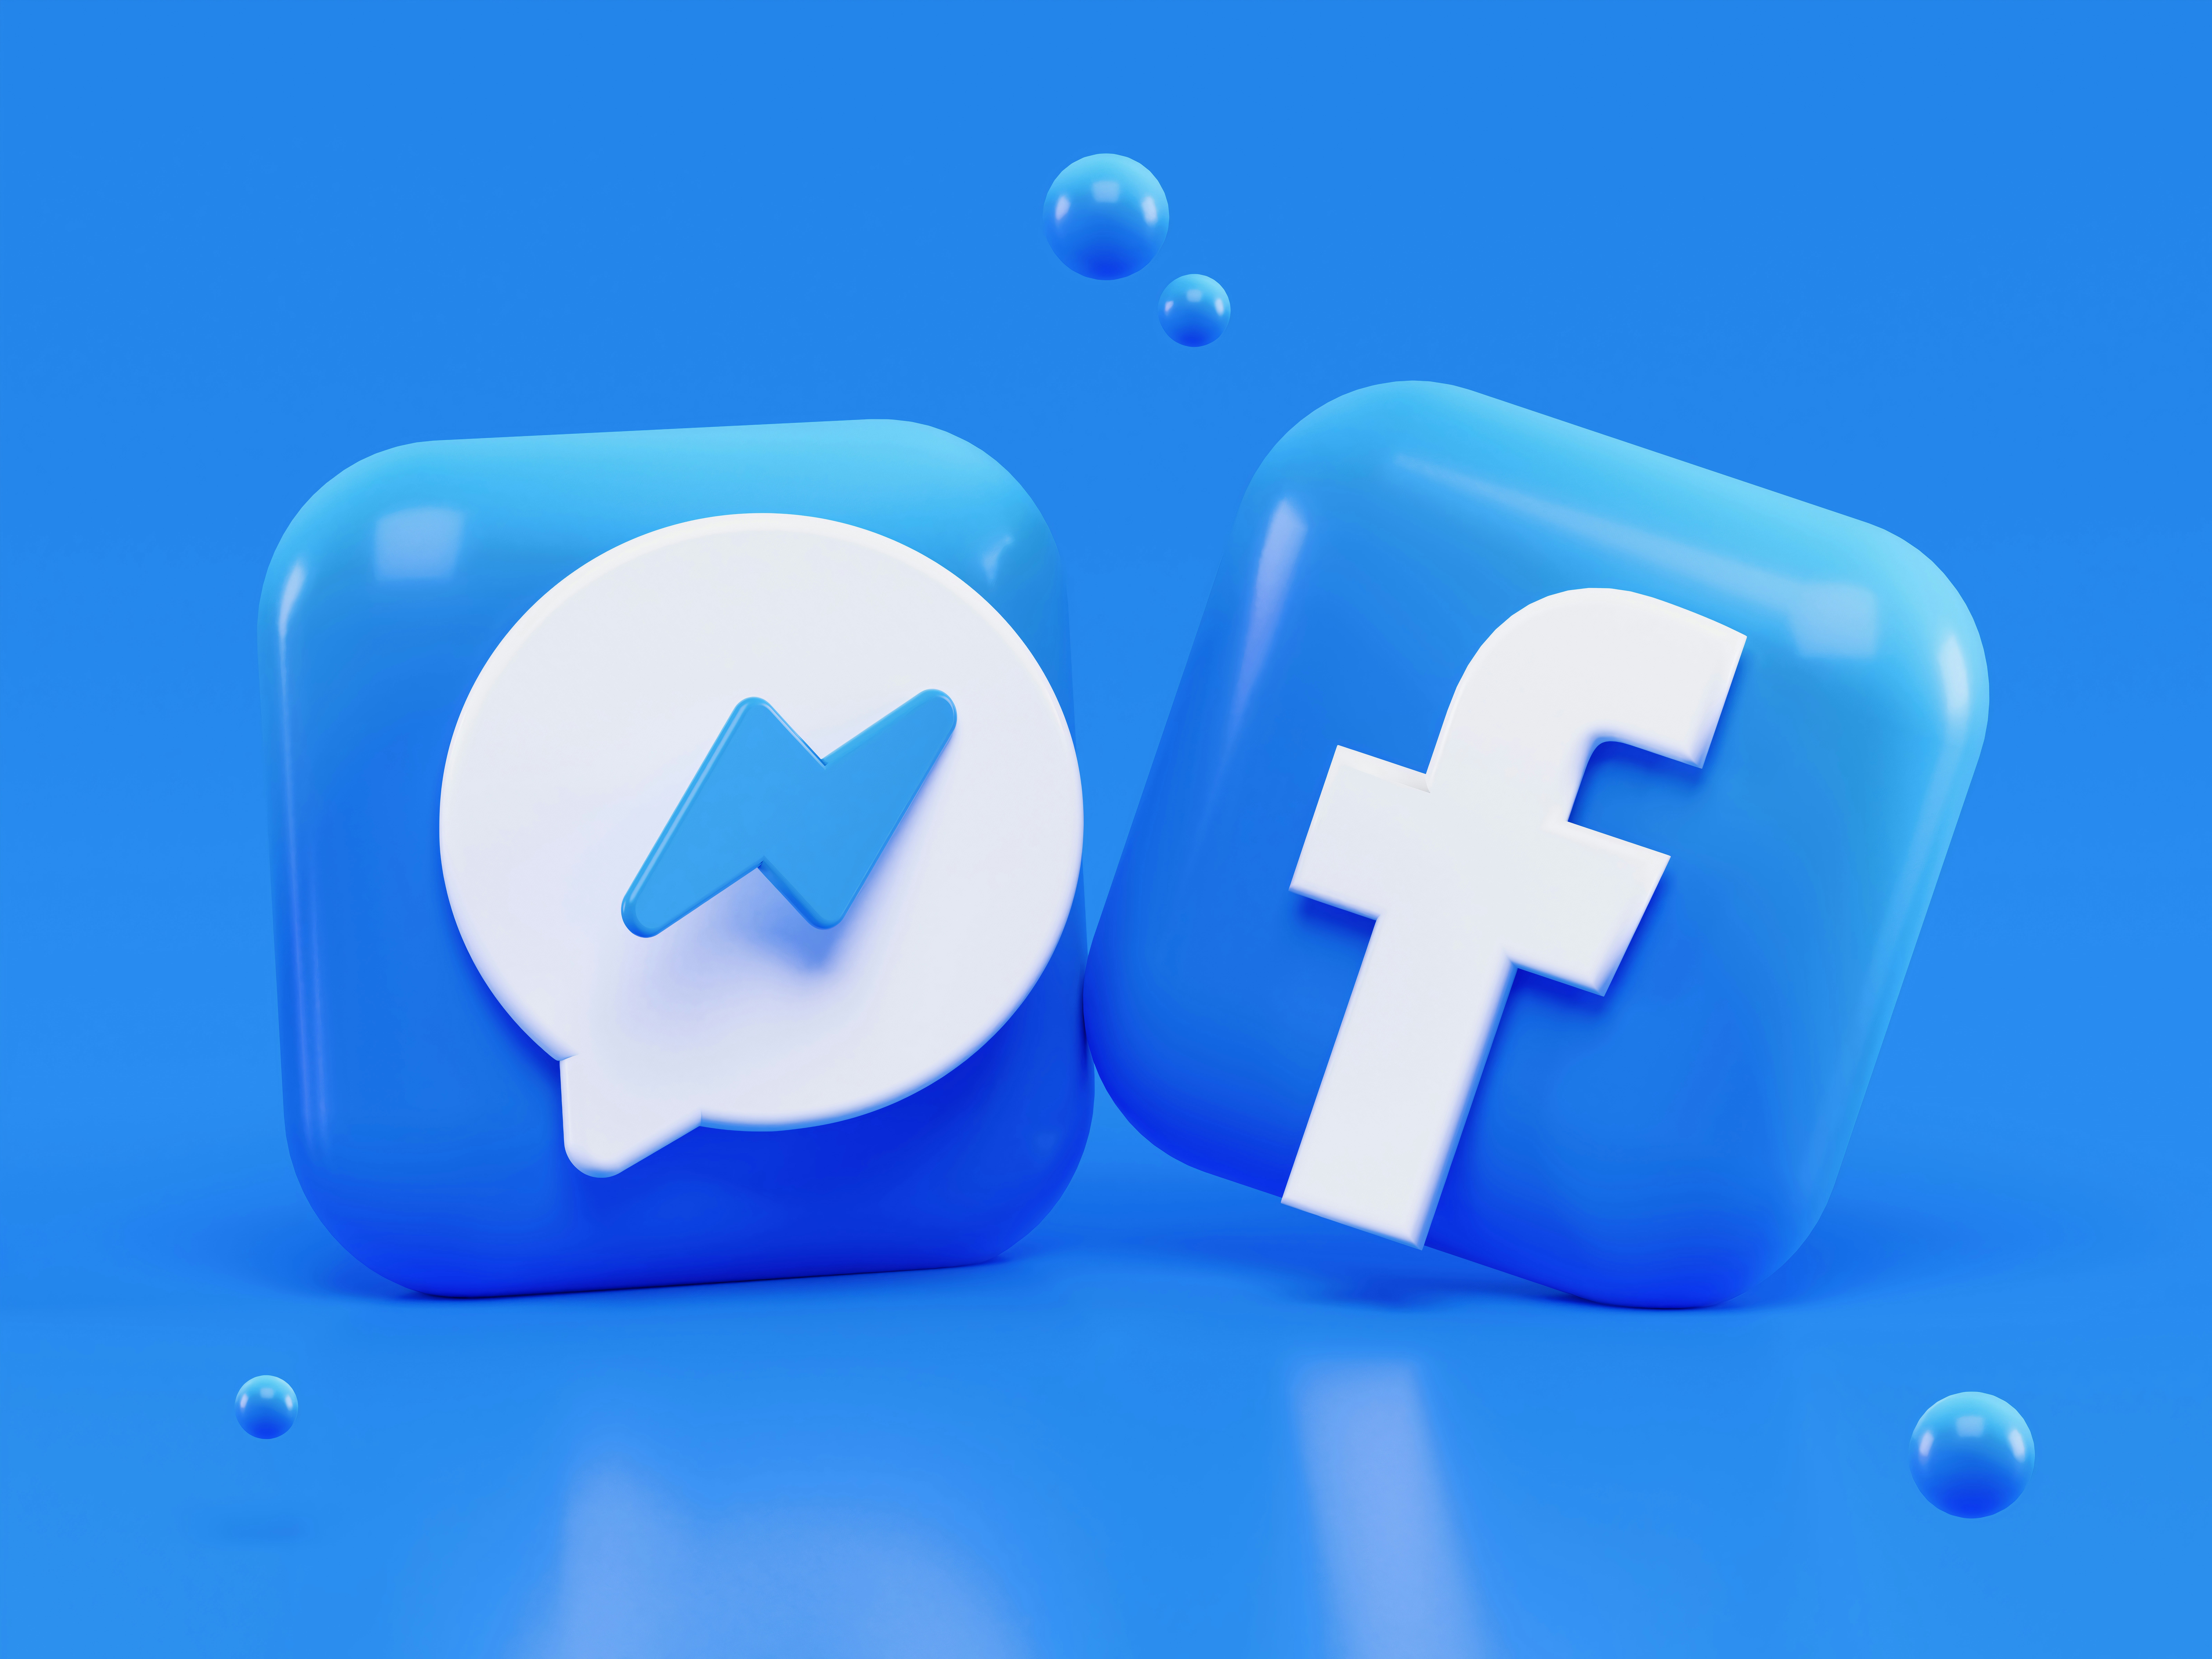 Facebook \u0026 Messenger 3D icons concept. Write me: alexanderbemore@gmail.com, if you need 3D visuals for your products.